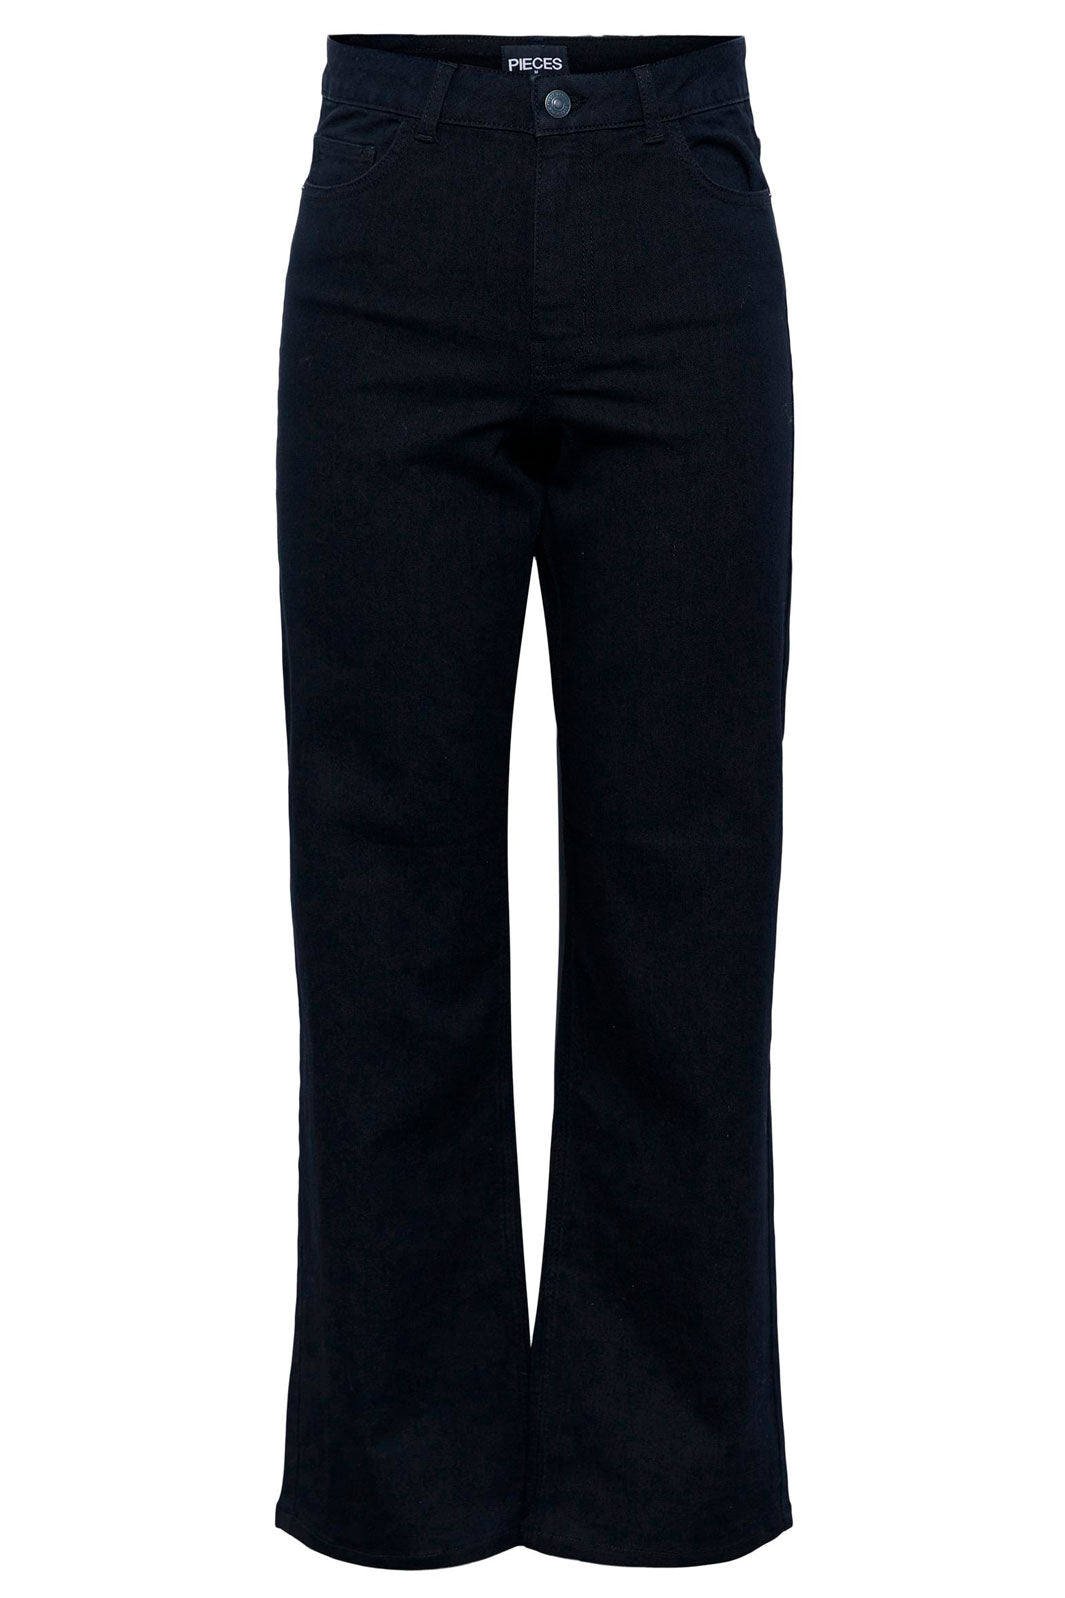 Pieces - PcPeggy Flared Hw Wide Pant Blc - Black Jeans 